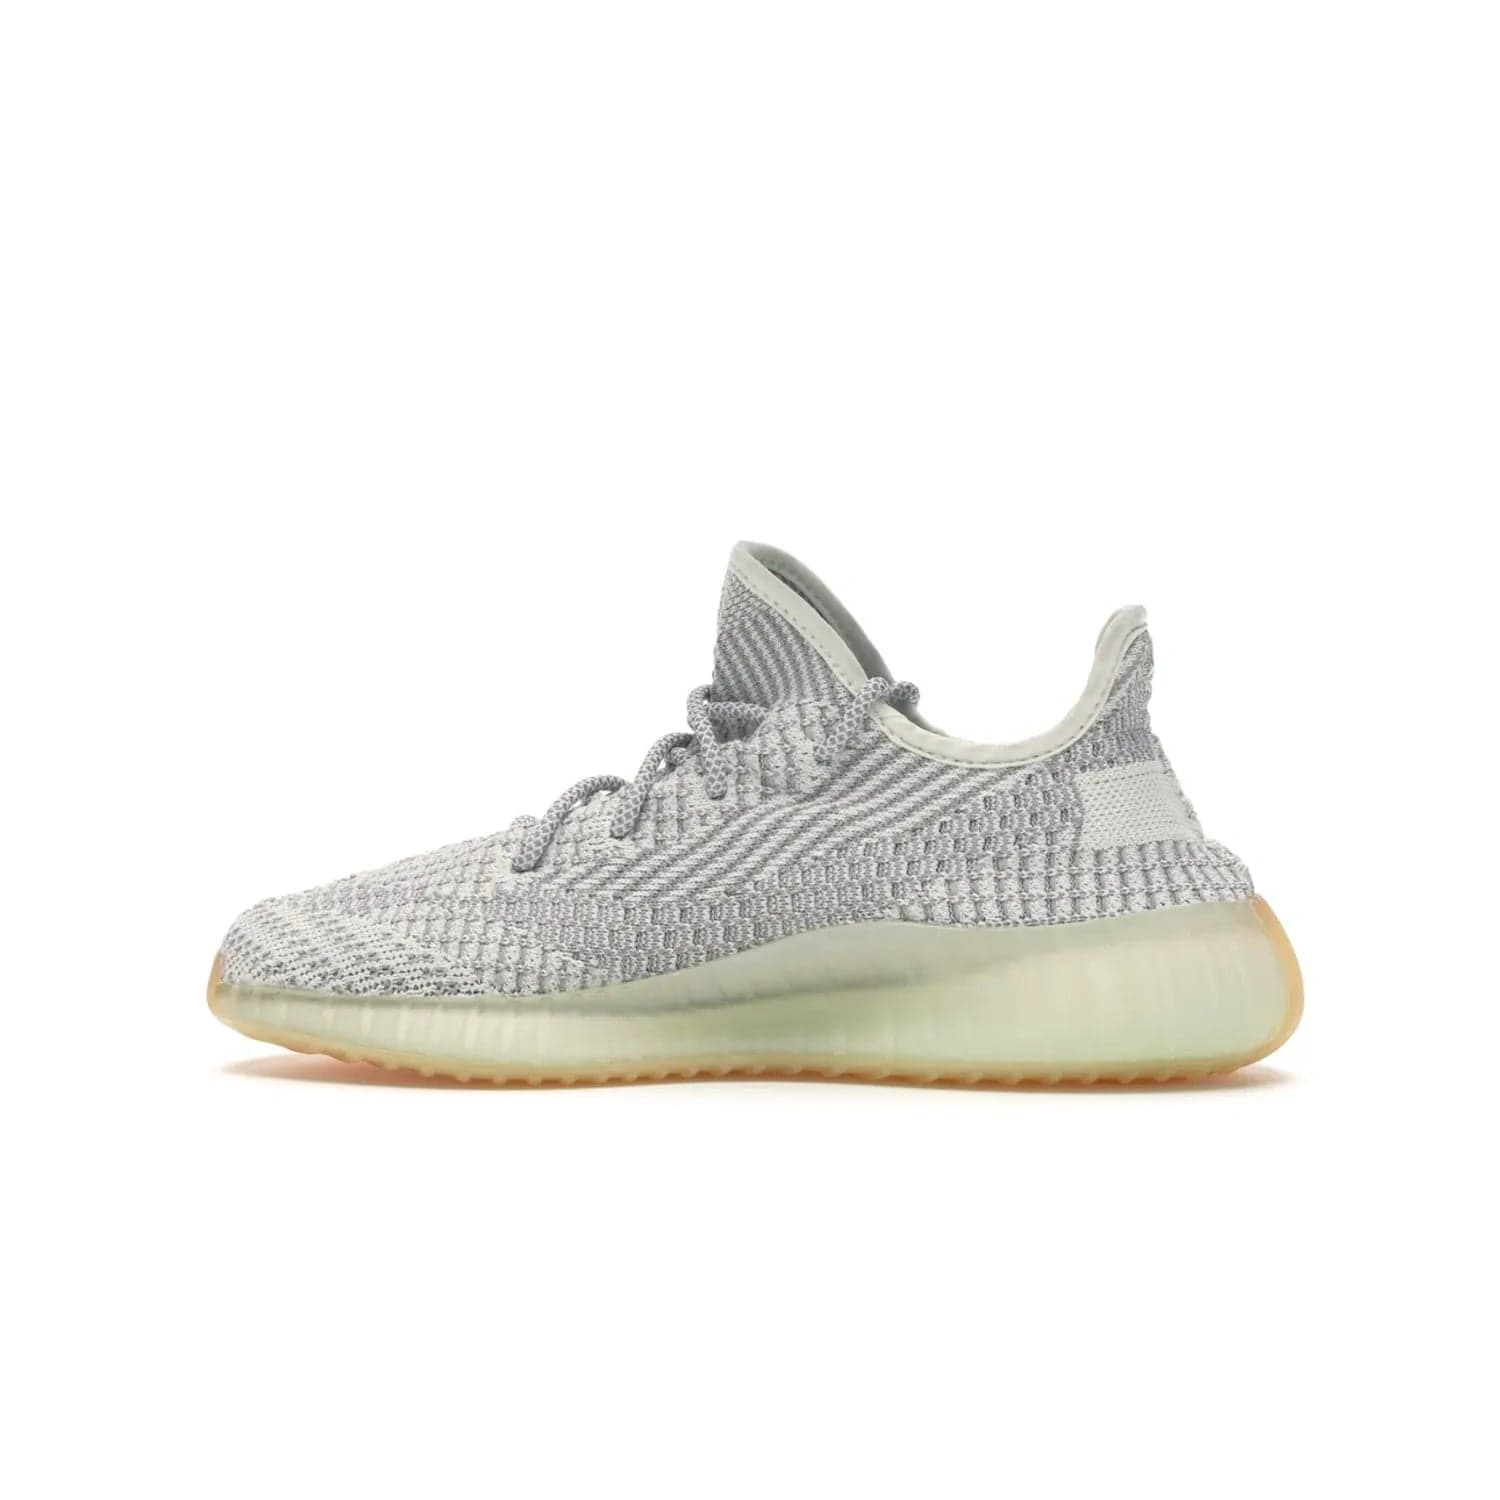 adidas Yeezy Boost 350 V2 Yeshaya (Non-Reflective) - Image 20 - Only at www.BallersClubKickz.com - Step out in style with the adidas Yeezy Boost 350 V2 Yeshaya (Non-Reflective). Gray-and-white Primeknit upper with mesh side stripe & rope laces, plus a translucent Boost sole with a hint of yellow. Make a statement and feel comfortable with this stylish sneaker.